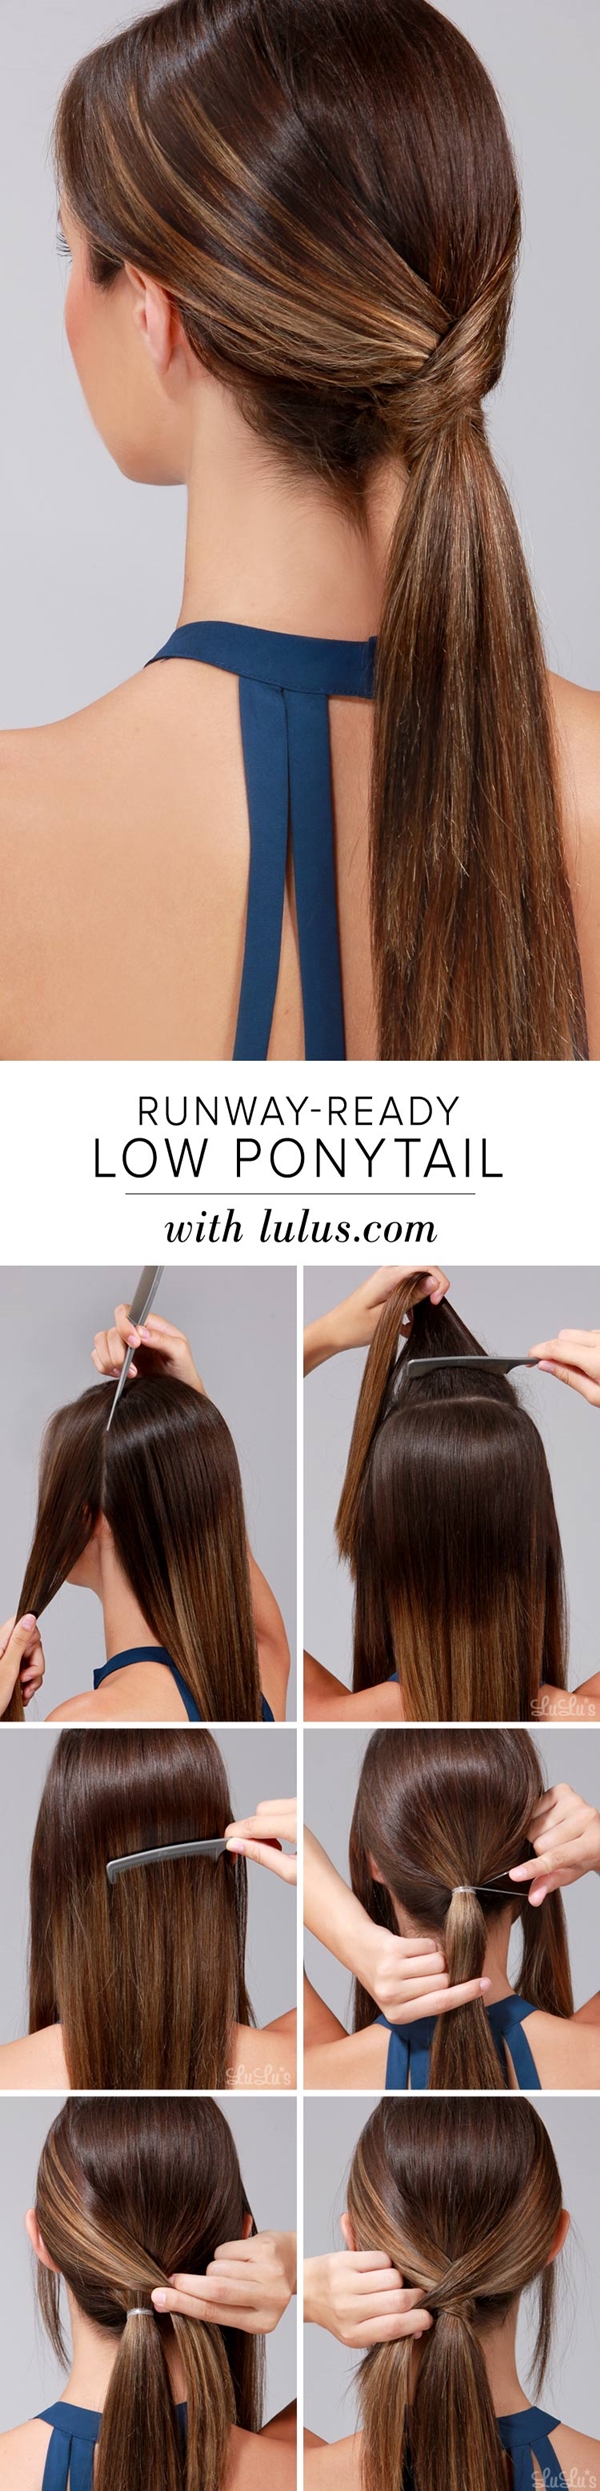 40 Quick And Easy Back To School Hairstyle For Long Hair